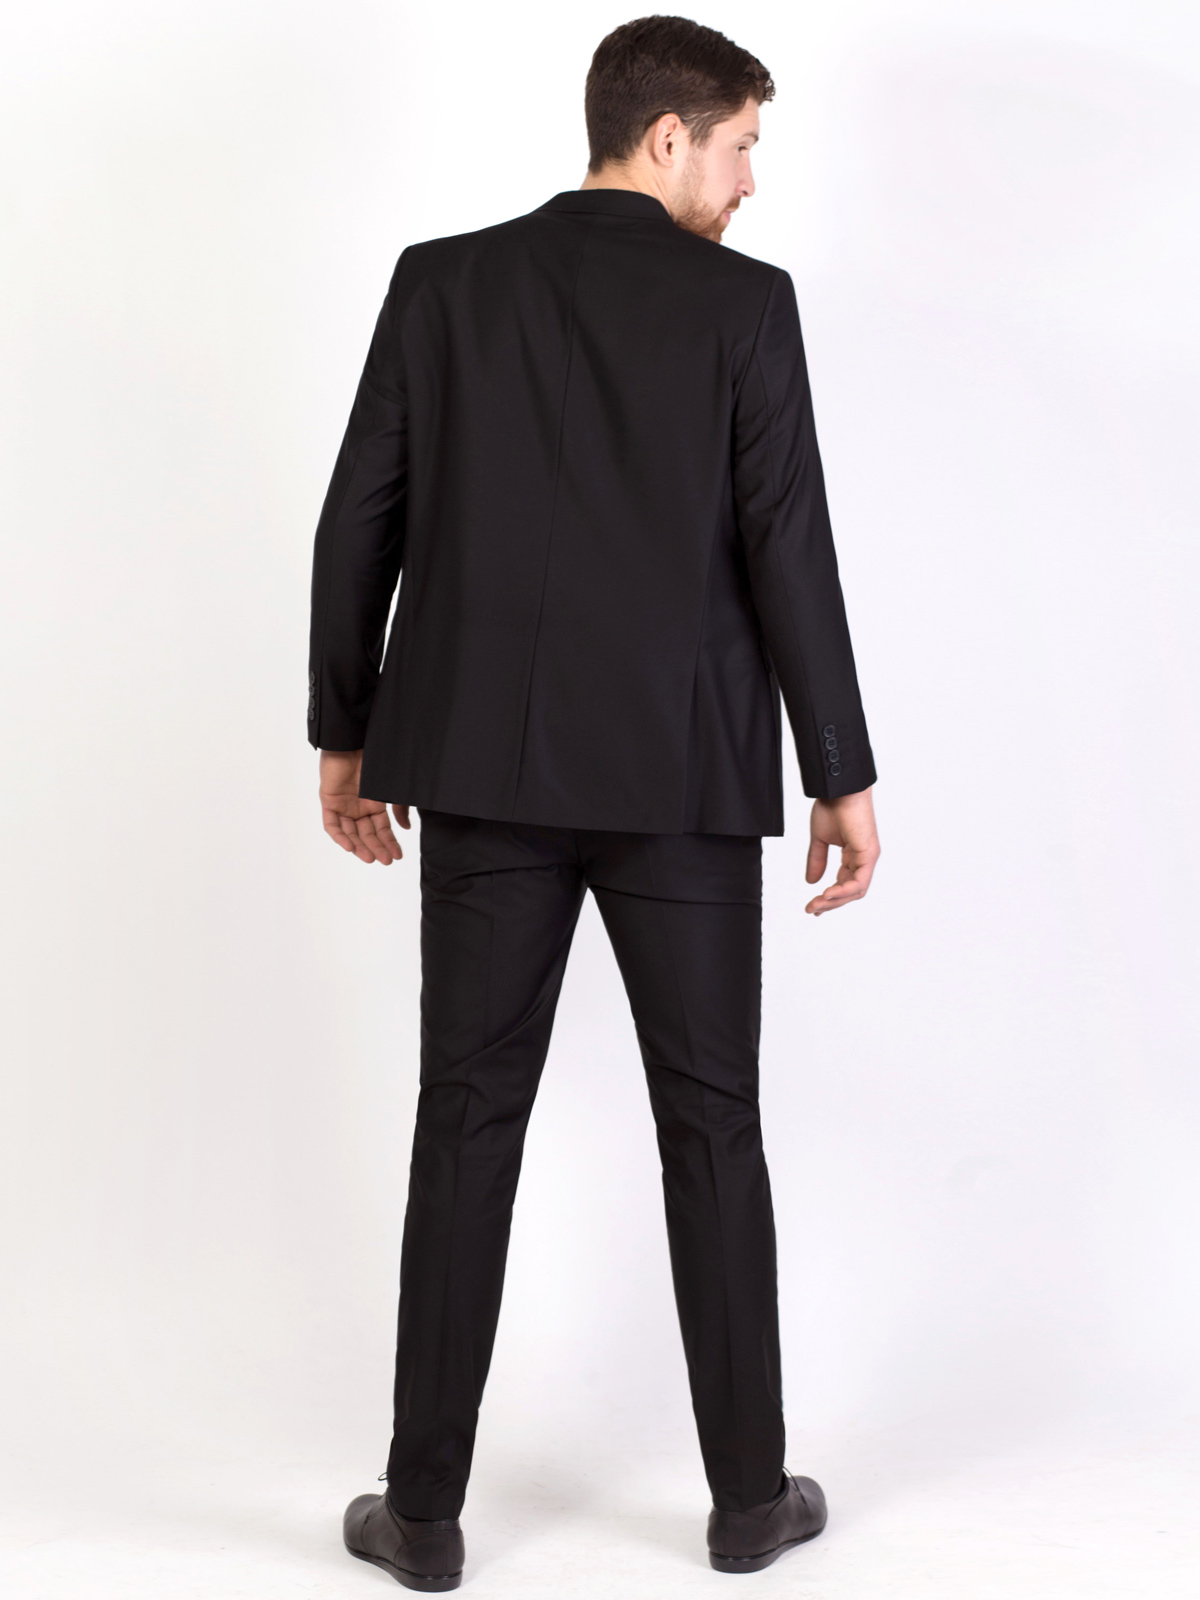  stylish black suit with fitted silhouet - 68051 € 185.60 img4